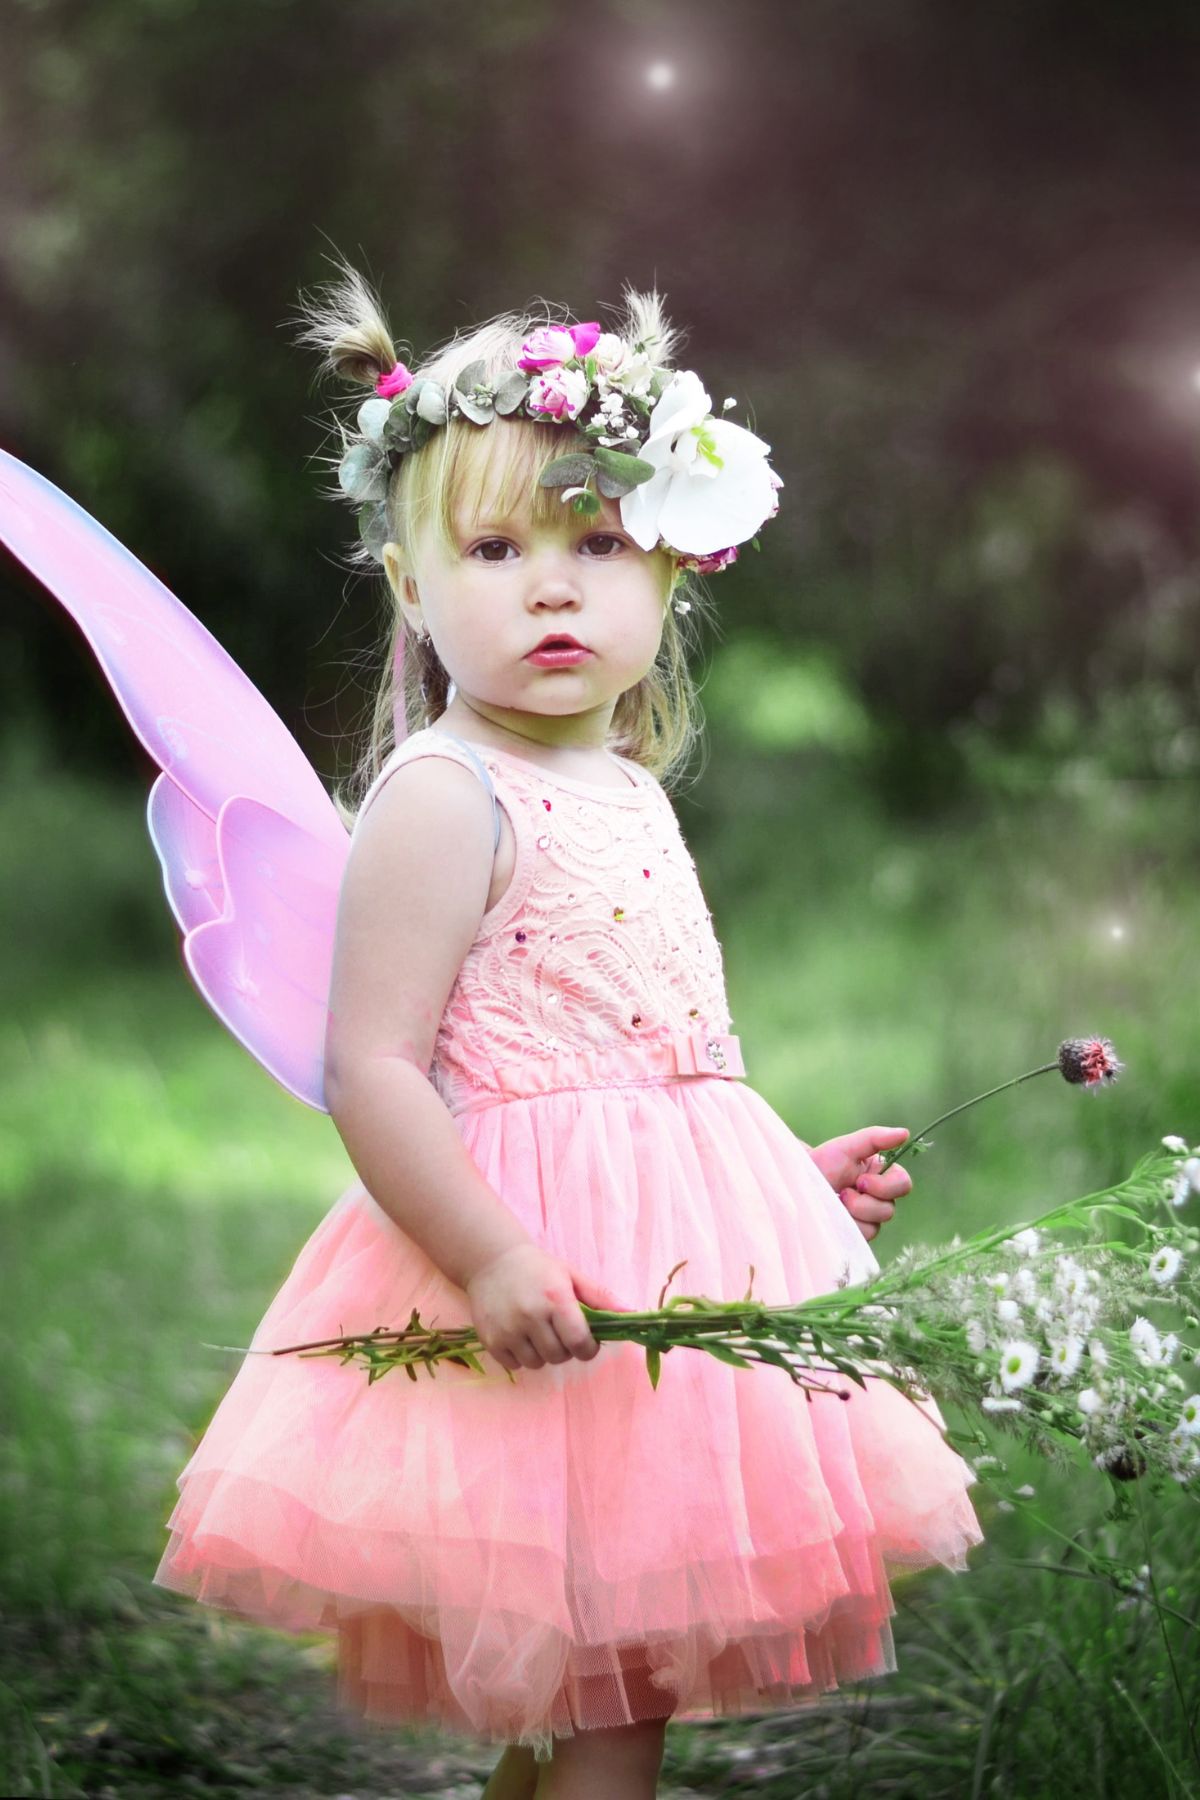 Little girl with flower crown, fairy wings, and flowers in the forest.